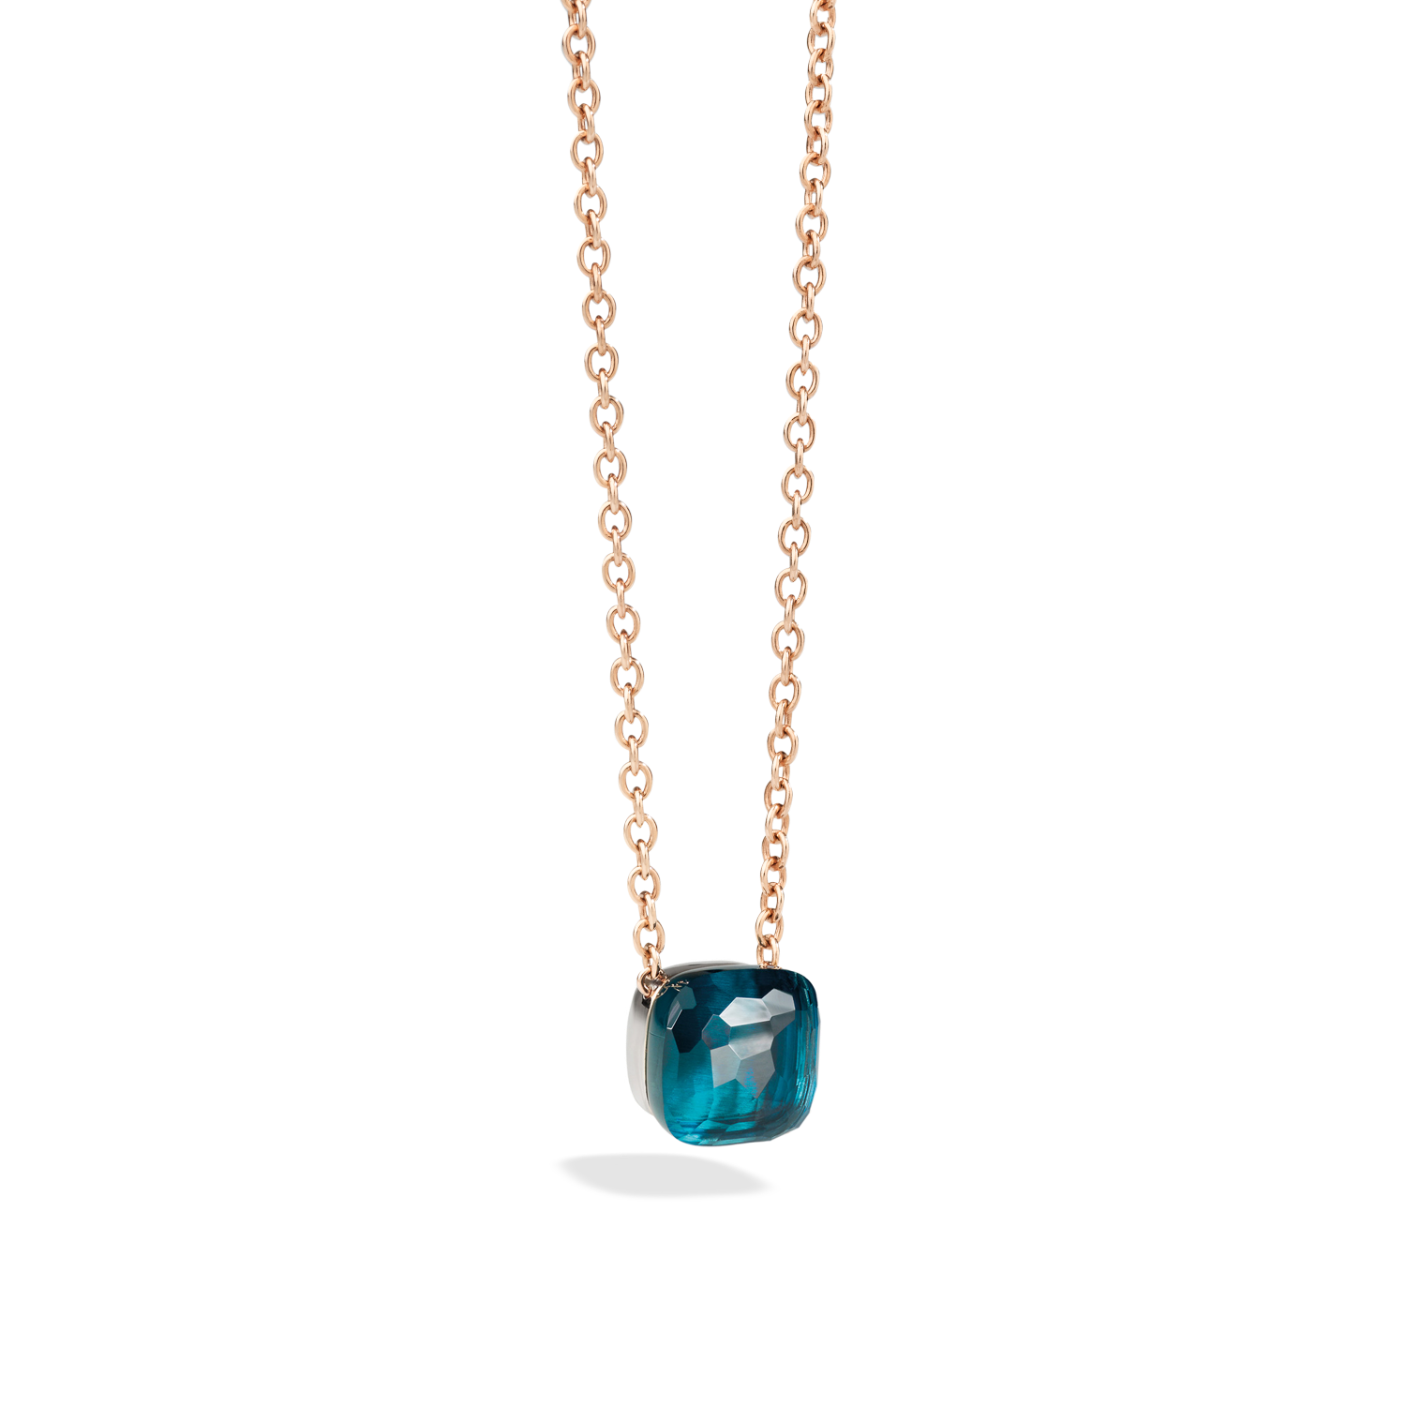 PCB601D_O6000_000TL_010_Pomellato_pendant-maxi-with-chain-nudo-rose-gold-18kt-white-gold-18kt-blue-london-topaz.png